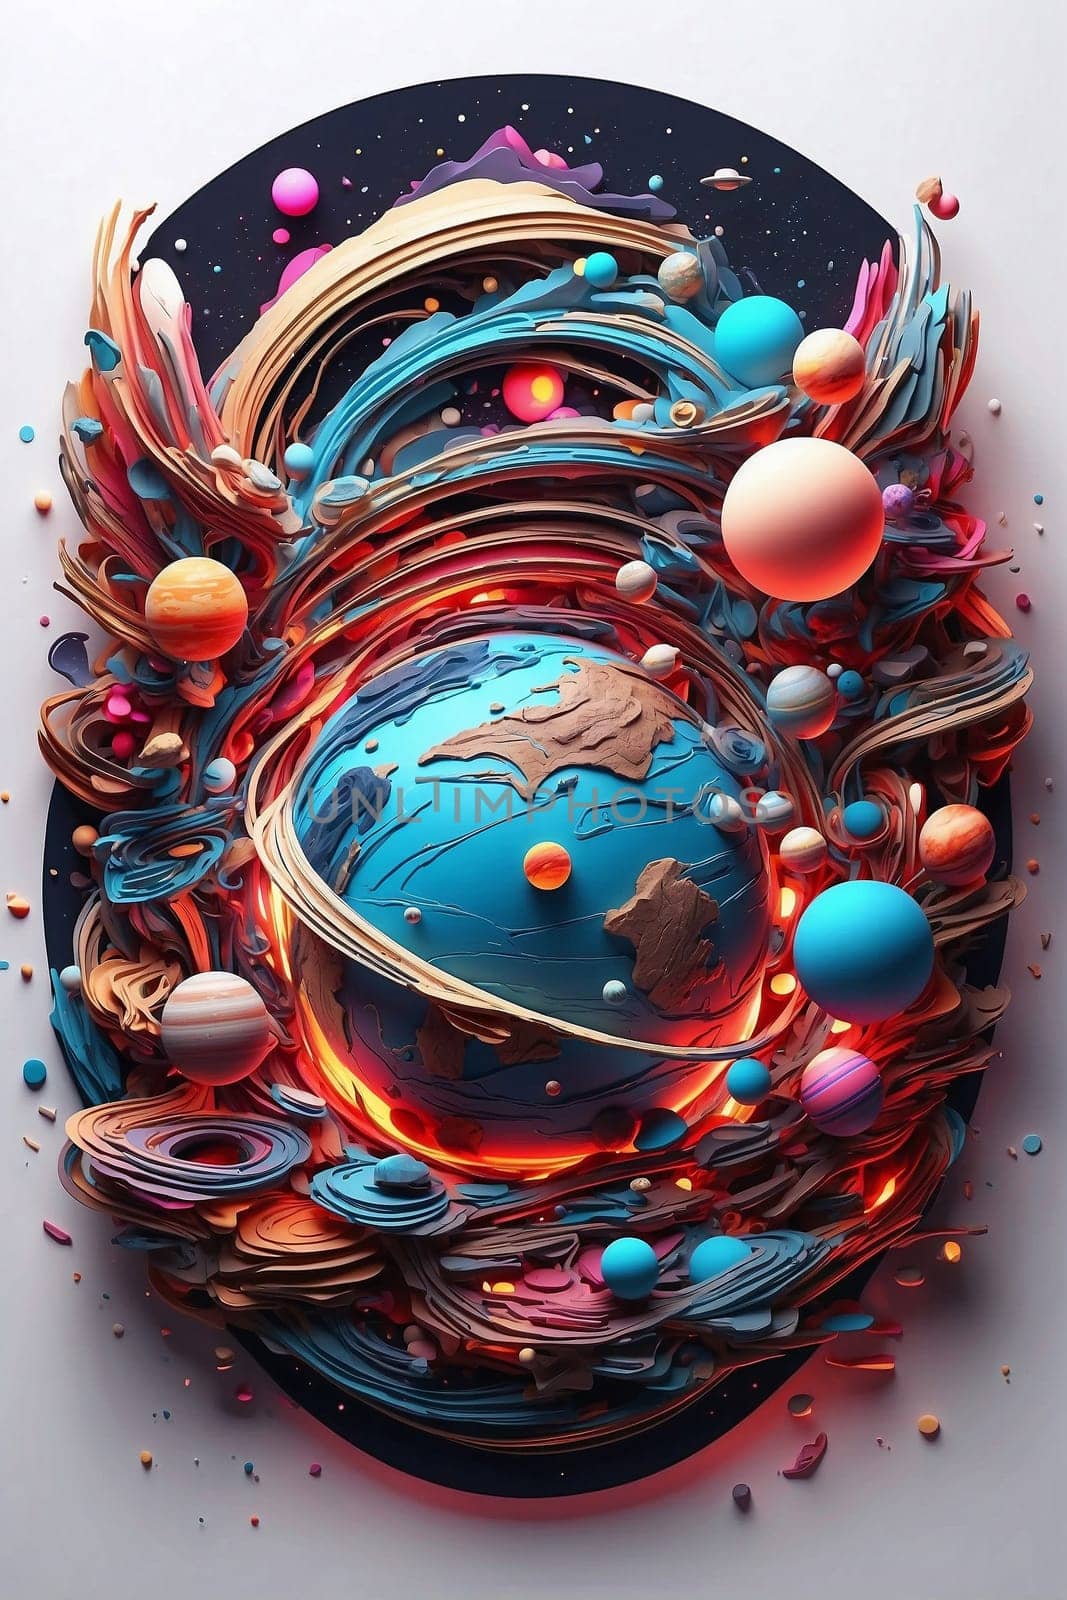 This photo captures a blue planet encircled by vibrant and diverse objects.